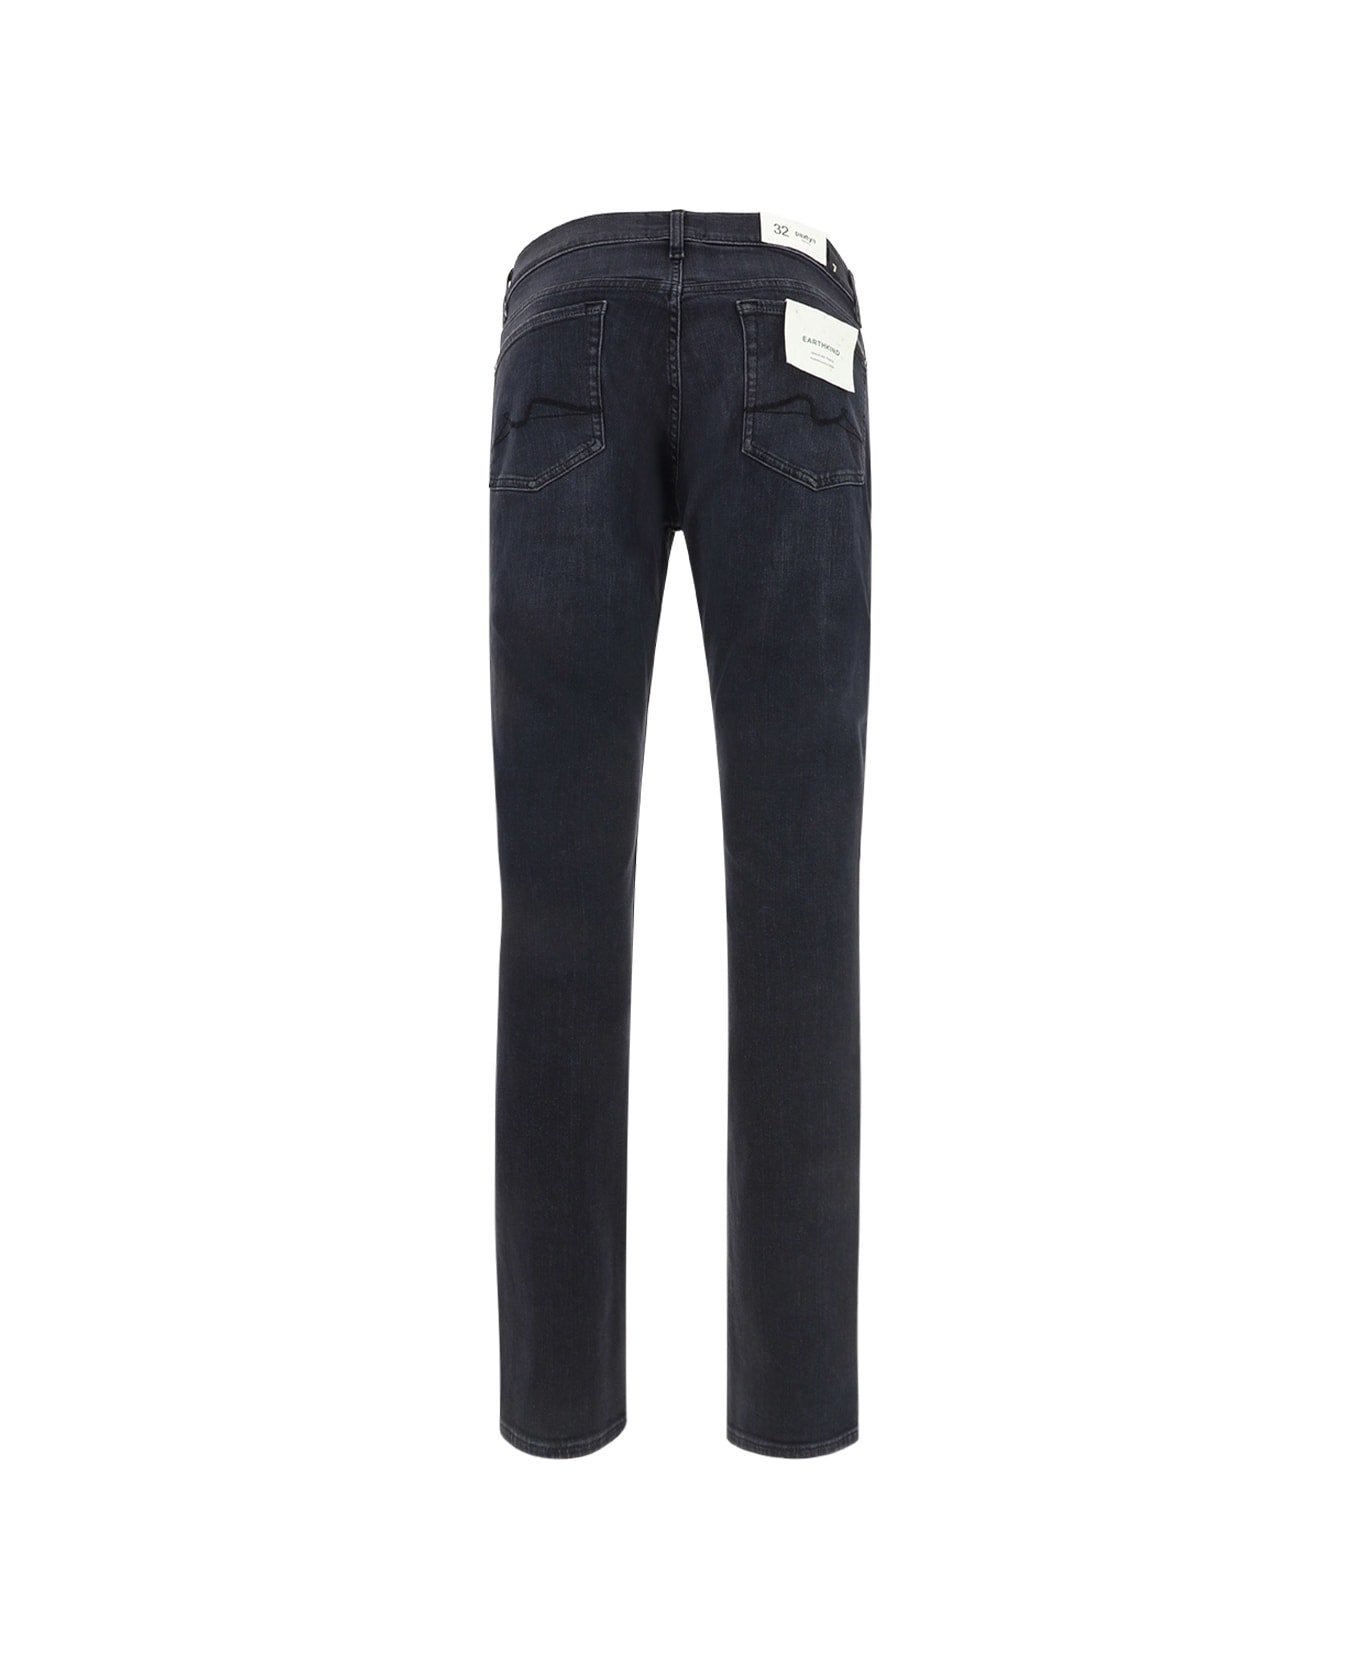 7 For All Mankind Paxytyn Jeans - BLACK